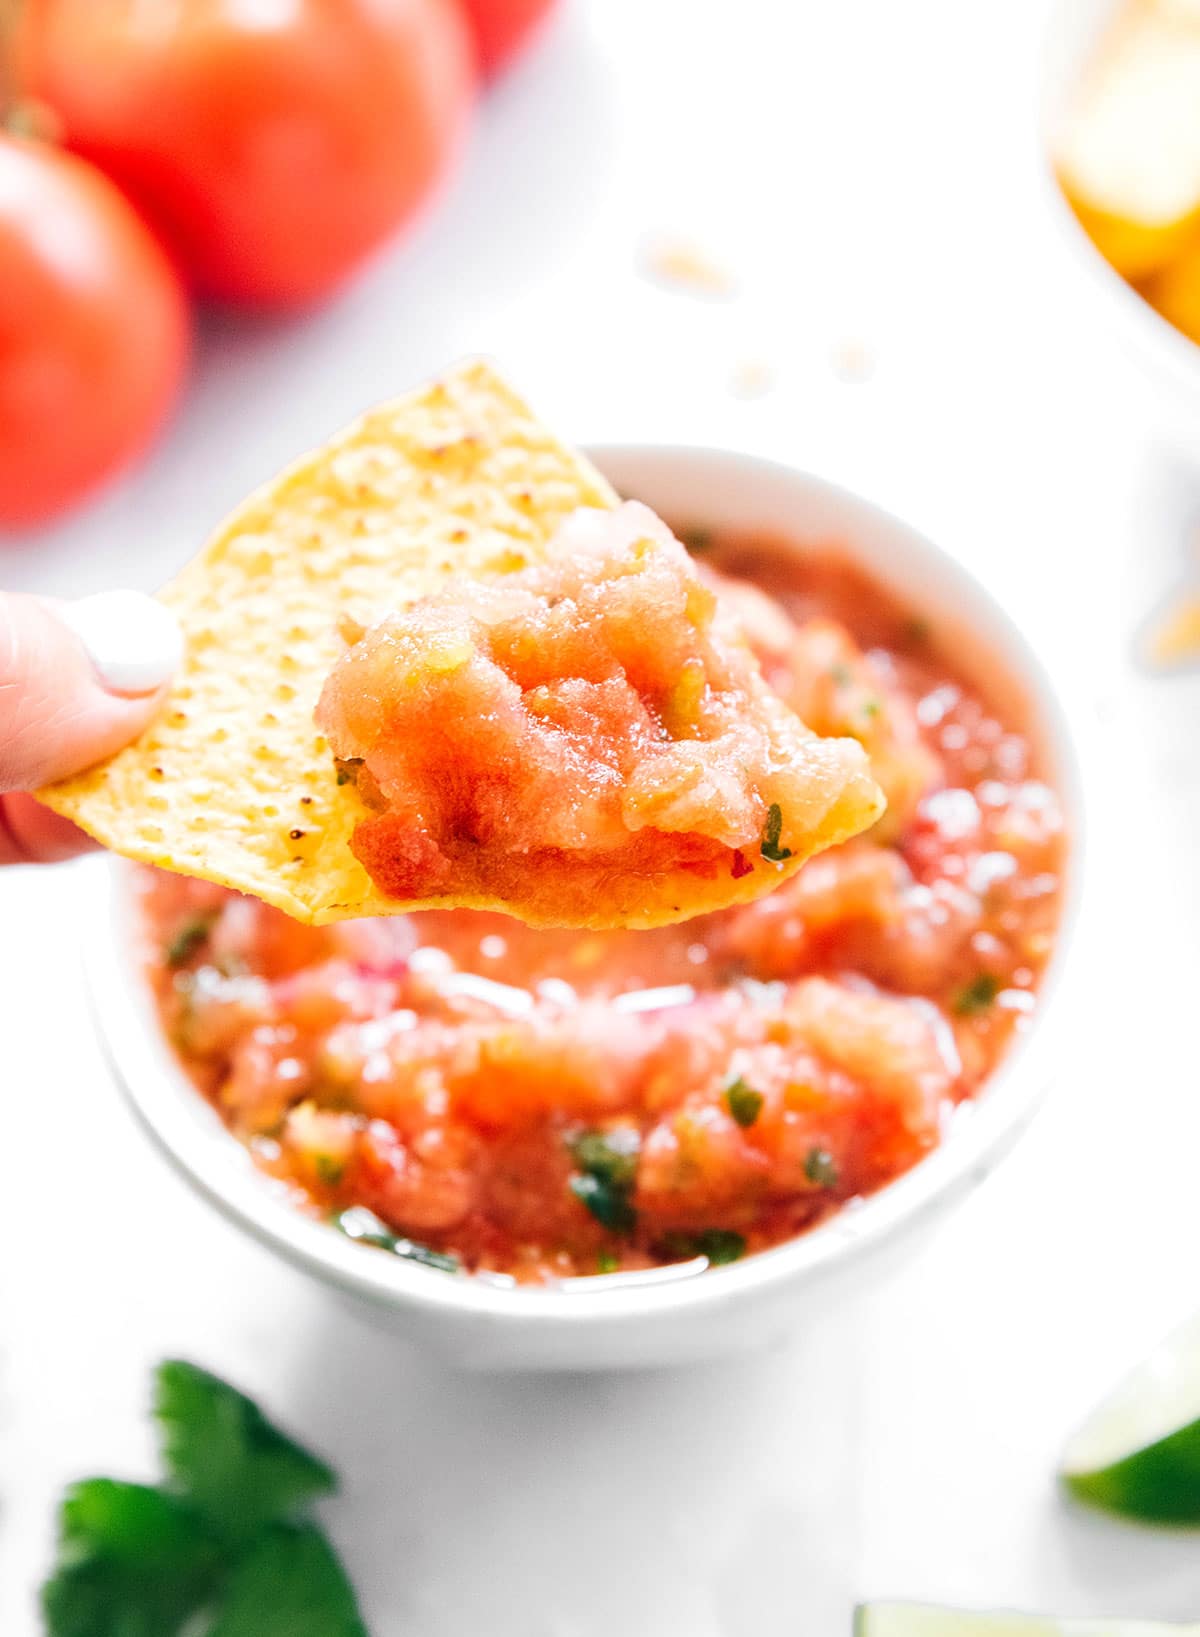 A chip being dipped into a small white bowl of blended salsa.